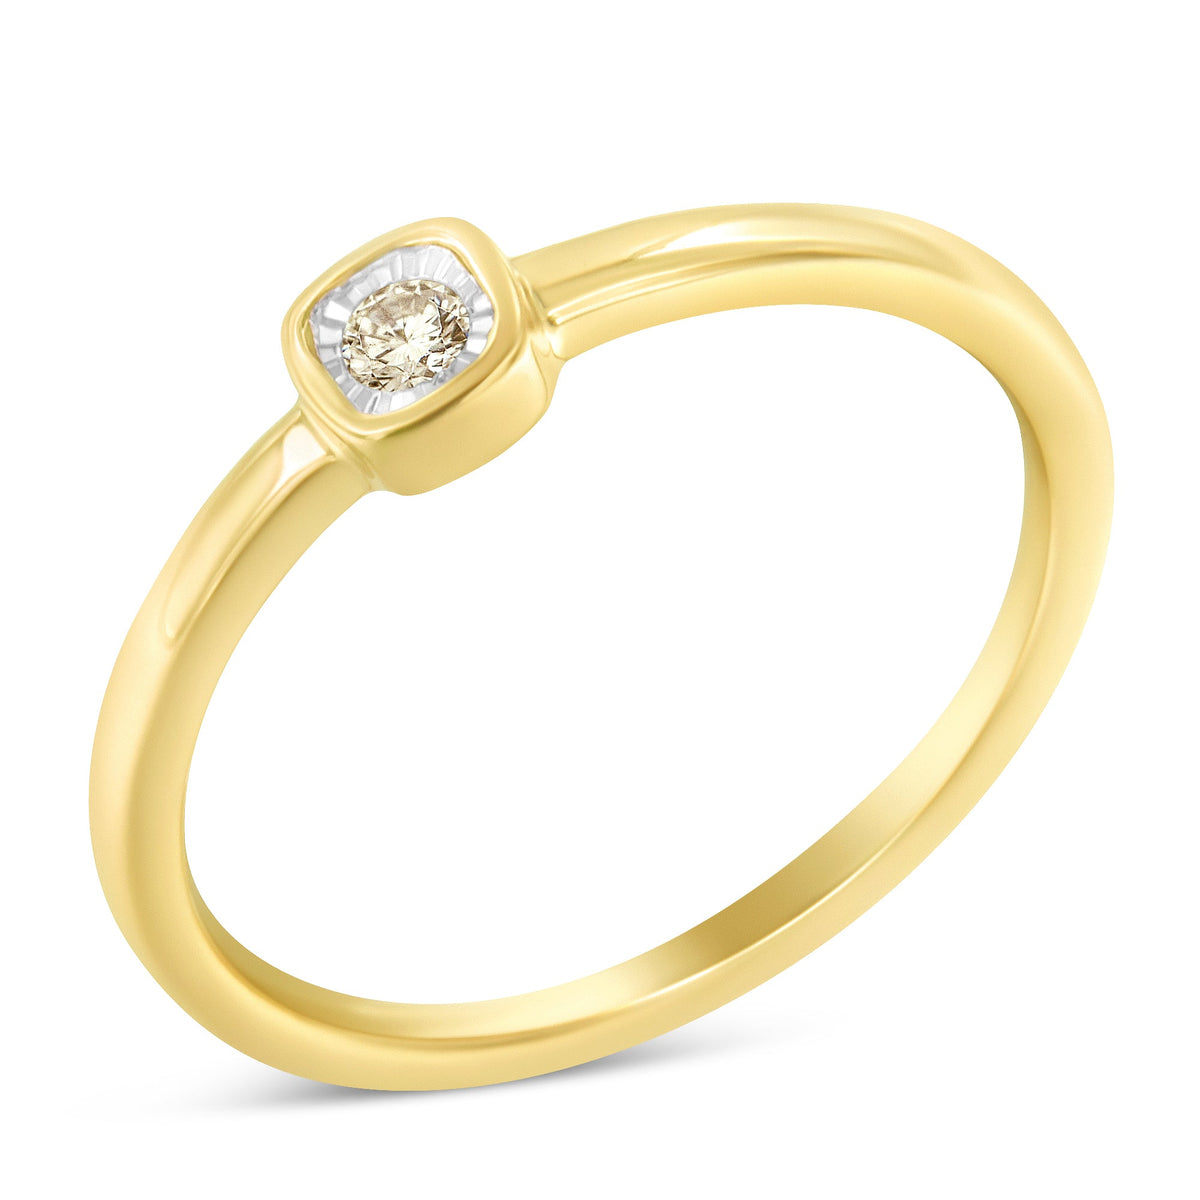 14K Yellow Gold Plated .925 Sterling Silver 1/20 Carat Diamond Square Cushion-Shaped Miracle Set Petite Fashion Promise Ring (J-K Color, I1-I2 Clarity) - Size 6 - LinkagejewelrydesignLinkagejewelrydesign